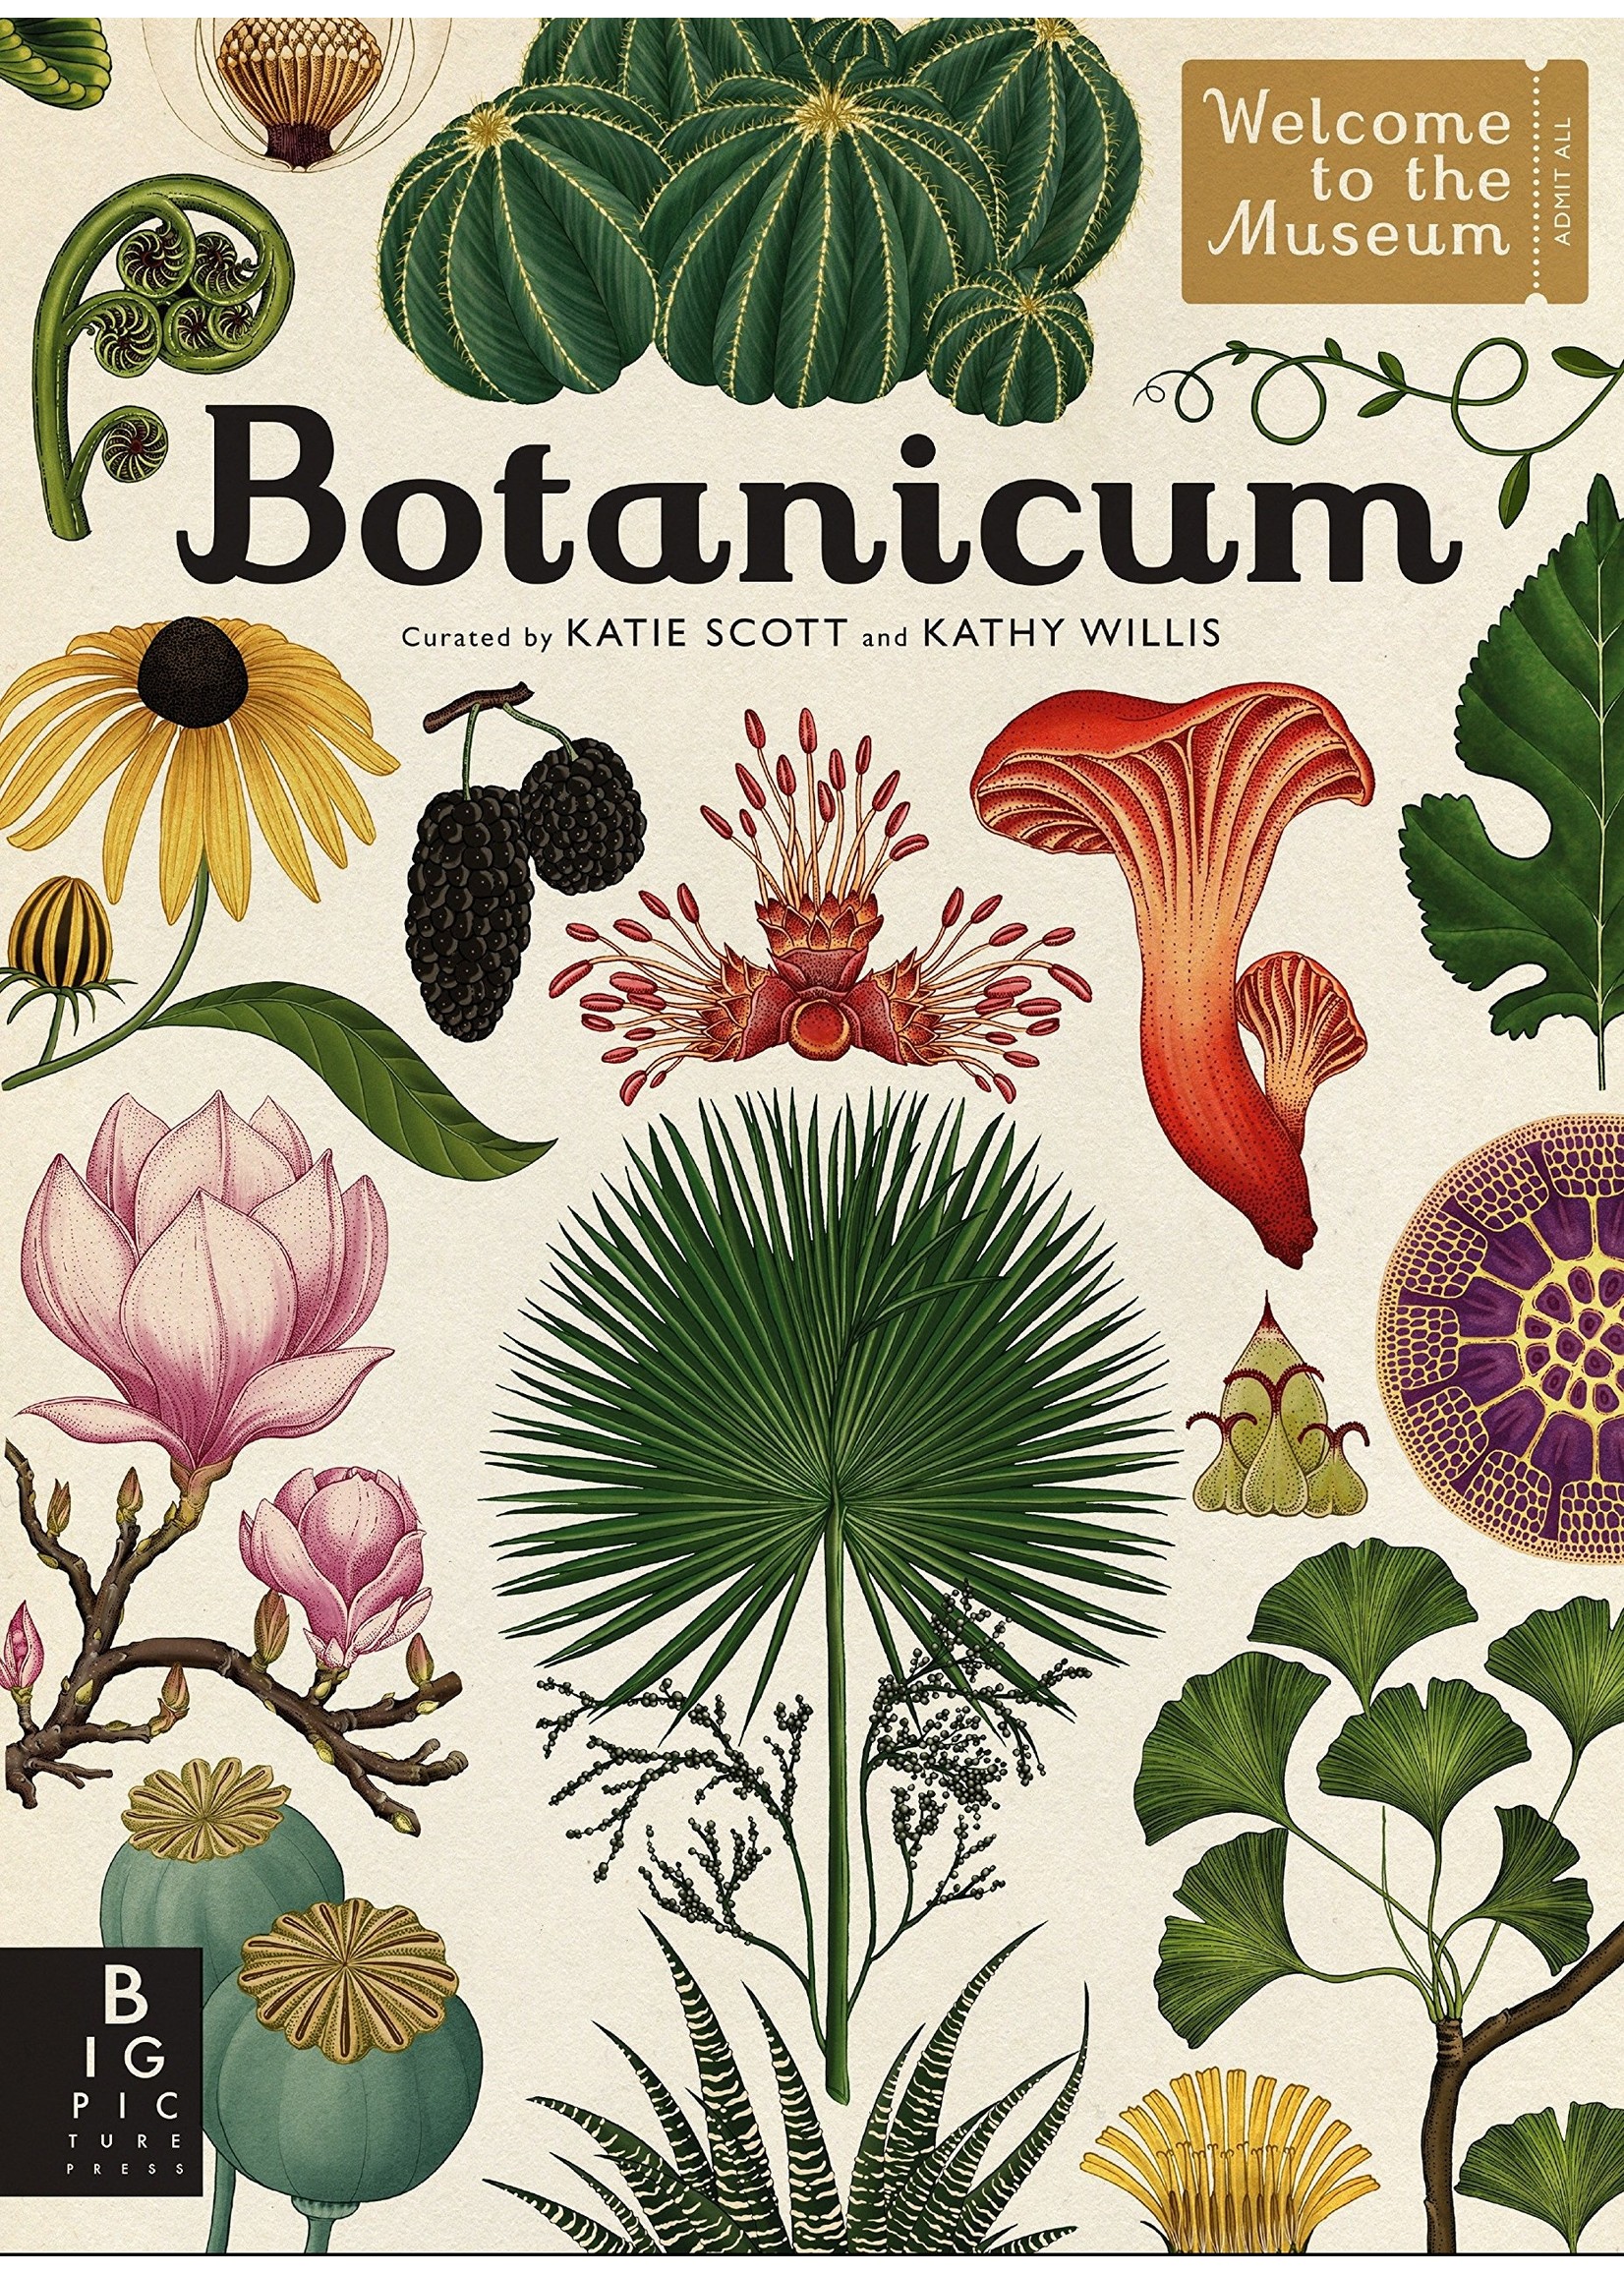 Botanicum: Welcome to the Museum (The 2016 offering from Big Picture Press's Welcome to the Museum series, Botanicum, is a brilliantly curated guide to plant life. With artwork from Katie Scott of Animalium fame, Botanicum gives readers the experience of